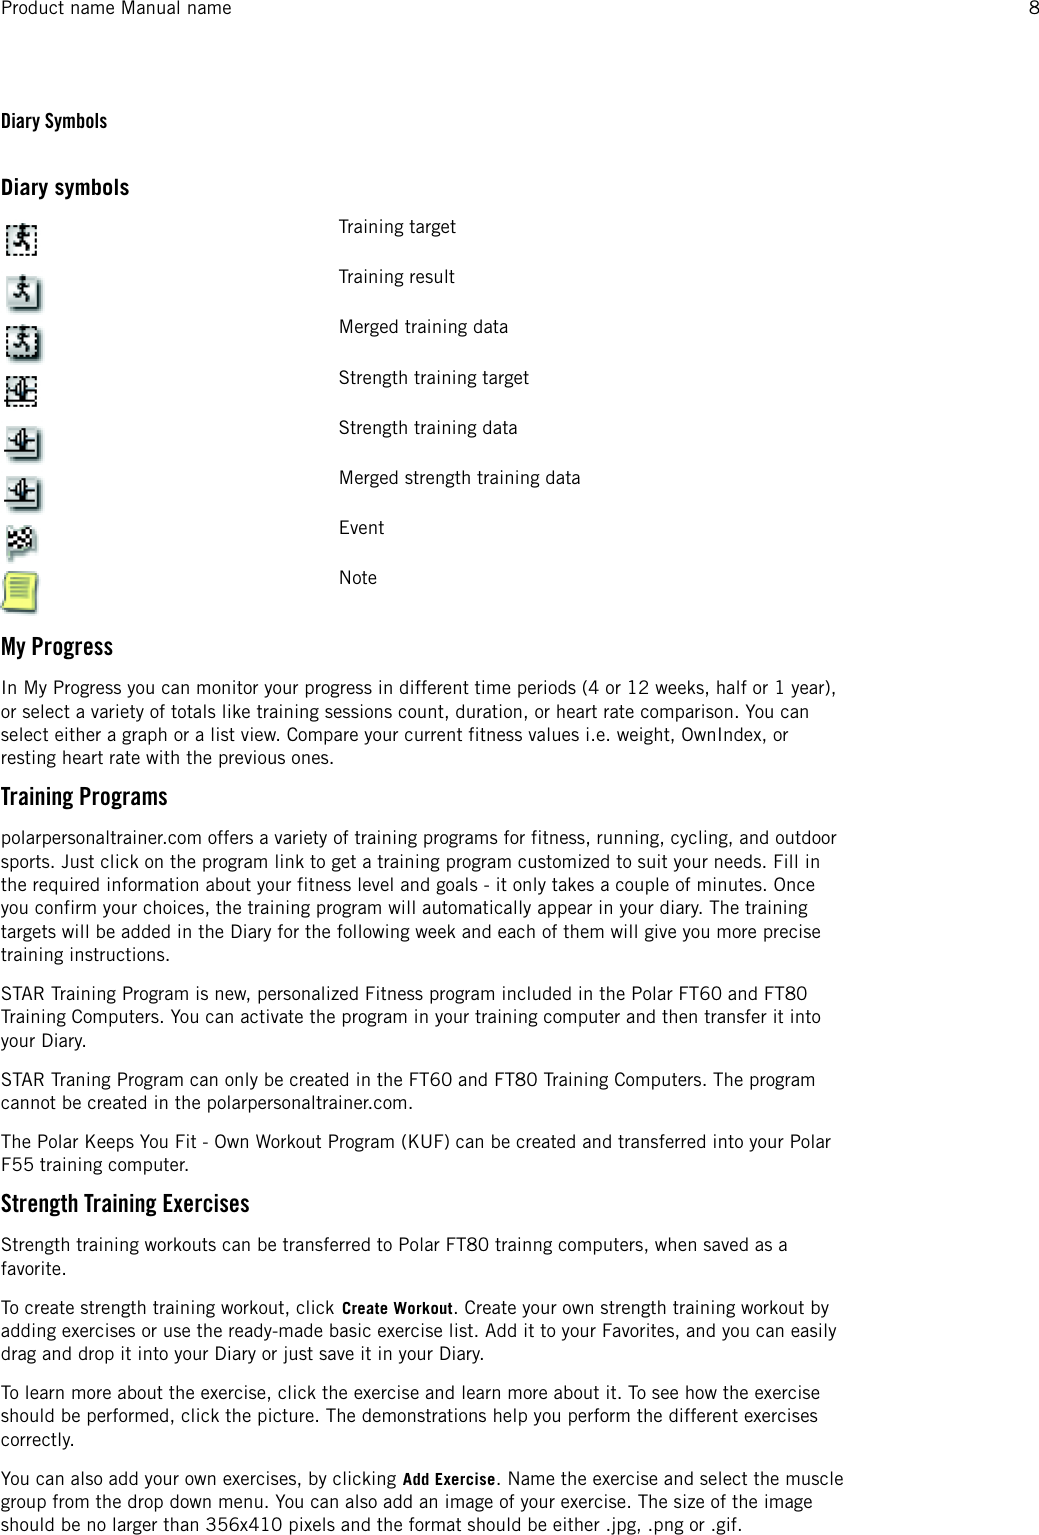 Diary SymbolsDiary symbolsTraining targetTraining resultMerged training dataStrength training targetStrength training dataMerged strength training dataEventNoteMy ProgressIn My Progress you can monitor your progress in different time periods (4 or 12 weeks, half or 1 year),or select a variety of totals like training sessions count, duration, or heart rate comparison. You canselect either a graph or a list view. Compare your current fitness values i.e. weight, OwnIndex, orresting heart rate with the previous ones.Training Programspolarpersonaltrainer.com offers a variety of training programs for fitness, running, cycling, and outdoorsports. Just click on the program link to get a training program customized to suit your needs. Fill inthe required information about your fitness level and goals - it only takes a couple of minutes. Onceyou confirm your choices, the training program will automatically appear in your diary. The trainingtargets will be added in the Diary for the following week and each of them will give you more precisetraining instructions.STAR Training Program is new, personalized Fitness program included in the Polar FT60 and FT80Training Computers. You can activate the program in your training computer and then transfer it intoyour Diary.STAR Traning Program can only be created in the FT60 and FT80 Training Computers. The programcannot be created in the polarpersonaltrainer.com.The Polar Keeps You Fit - Own Workout Program (KUF) can be created and transferred into your PolarF55 training computer.Strength Training ExercisesStrength training workouts can be transferred to Polar FT80 trainng computers, when saved as afavorite.To create strength training workout, click Create Workout. Create your own strength training workout byadding exercises or use the ready-made basic exercise list. Add it to your Favorites, and you can easilydrag and drop it into your Diary or just save it in your Diary.To learn more about the exercise, click the exercise and learn more about it. To see how the exerciseshould be performed, click the picture. The demonstrations help you perform the different exercisescorrectly.You can also add your own exercises, by clicking Add Exercise. Name the exercise and select the musclegroup from the drop down menu. You can also add an image of your exercise. The size of the imageshould be no larger than 356x410 pixels and the format should be either .jpg, .png or .gif.Product name Manual name 8